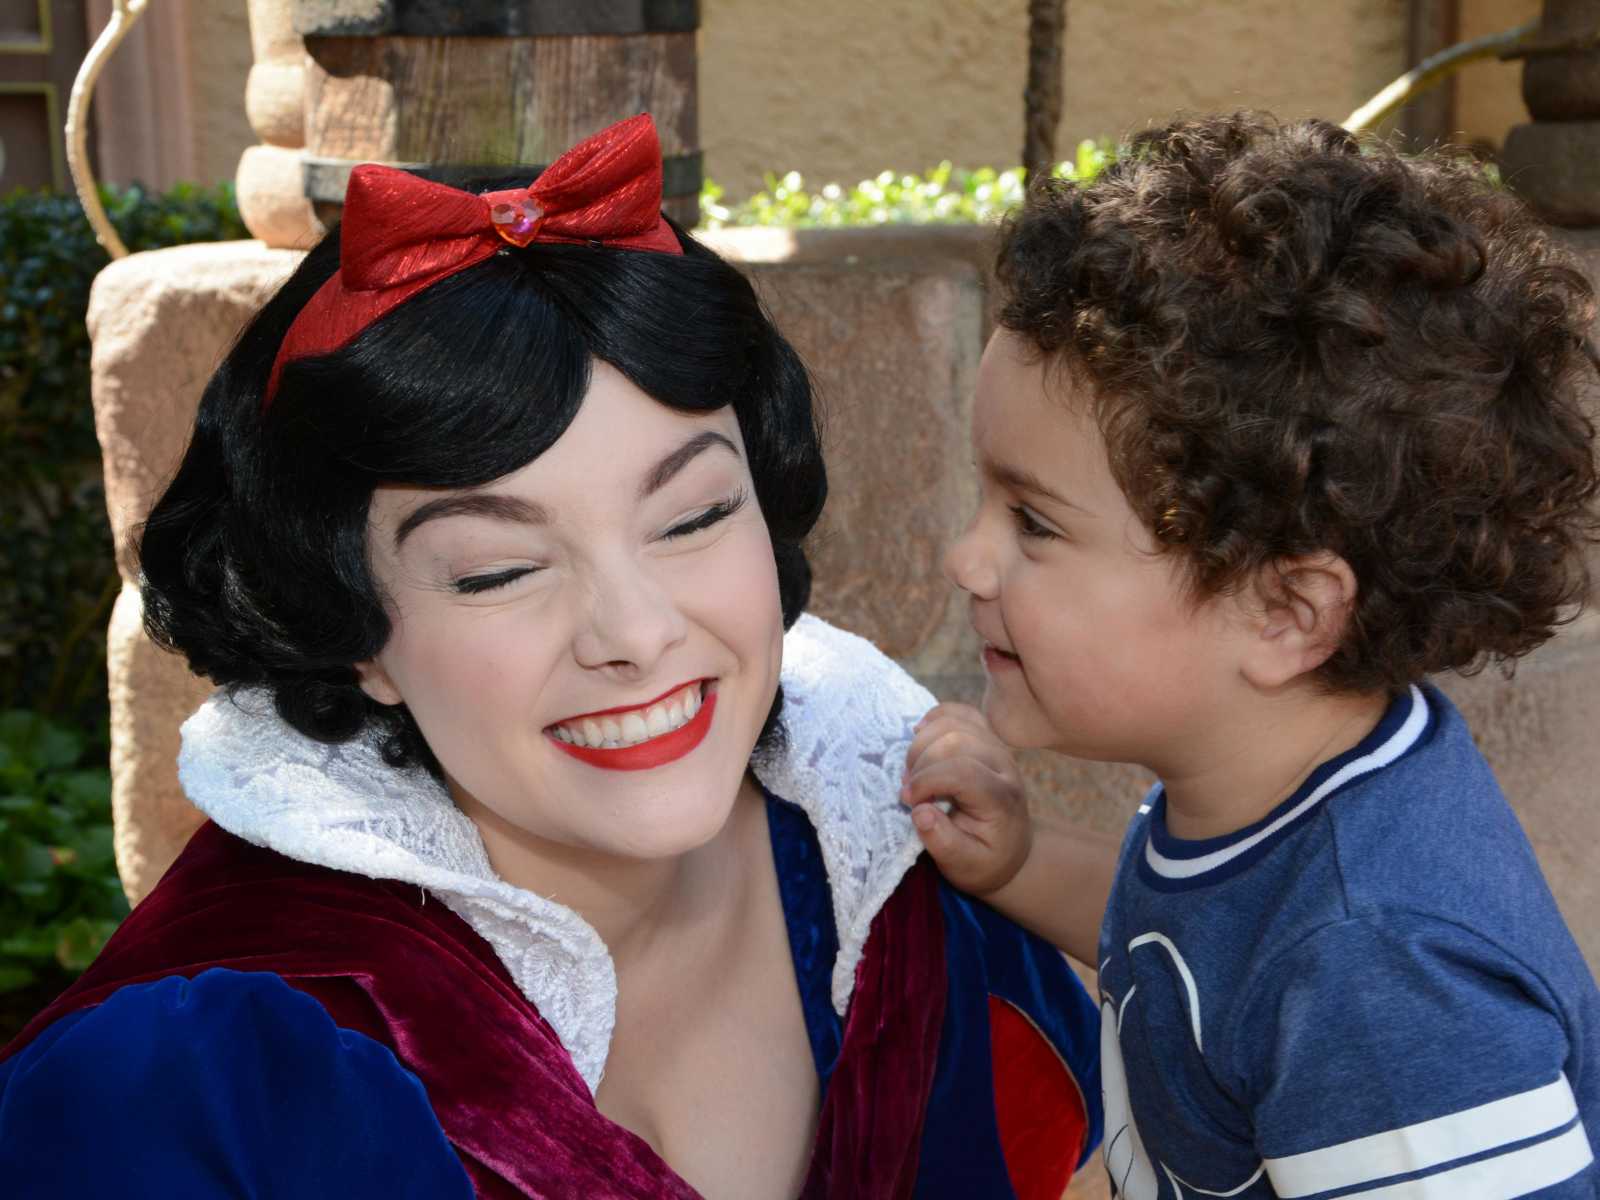 Snow White smiles while toddler stands close to her face at Disney World